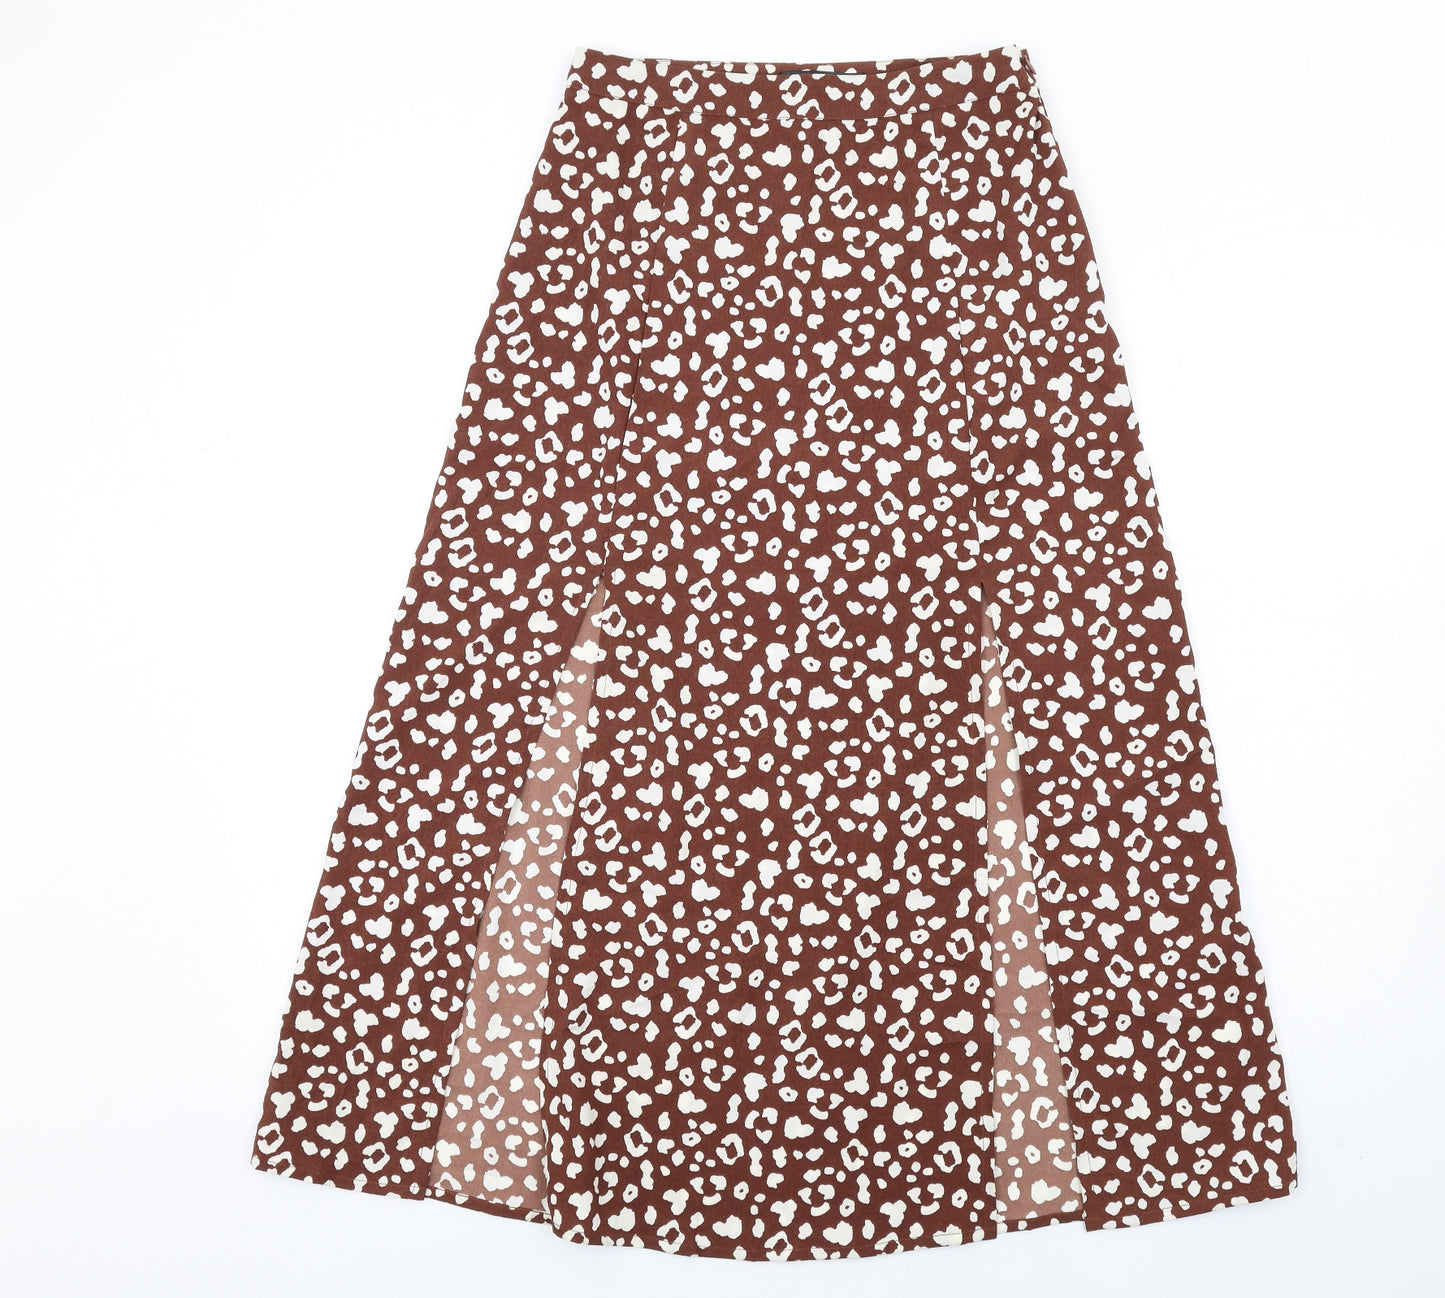 Missguided Womens Brown Animal Print Polyester A-Line Skirt Size 6 Zip - Leopard Print